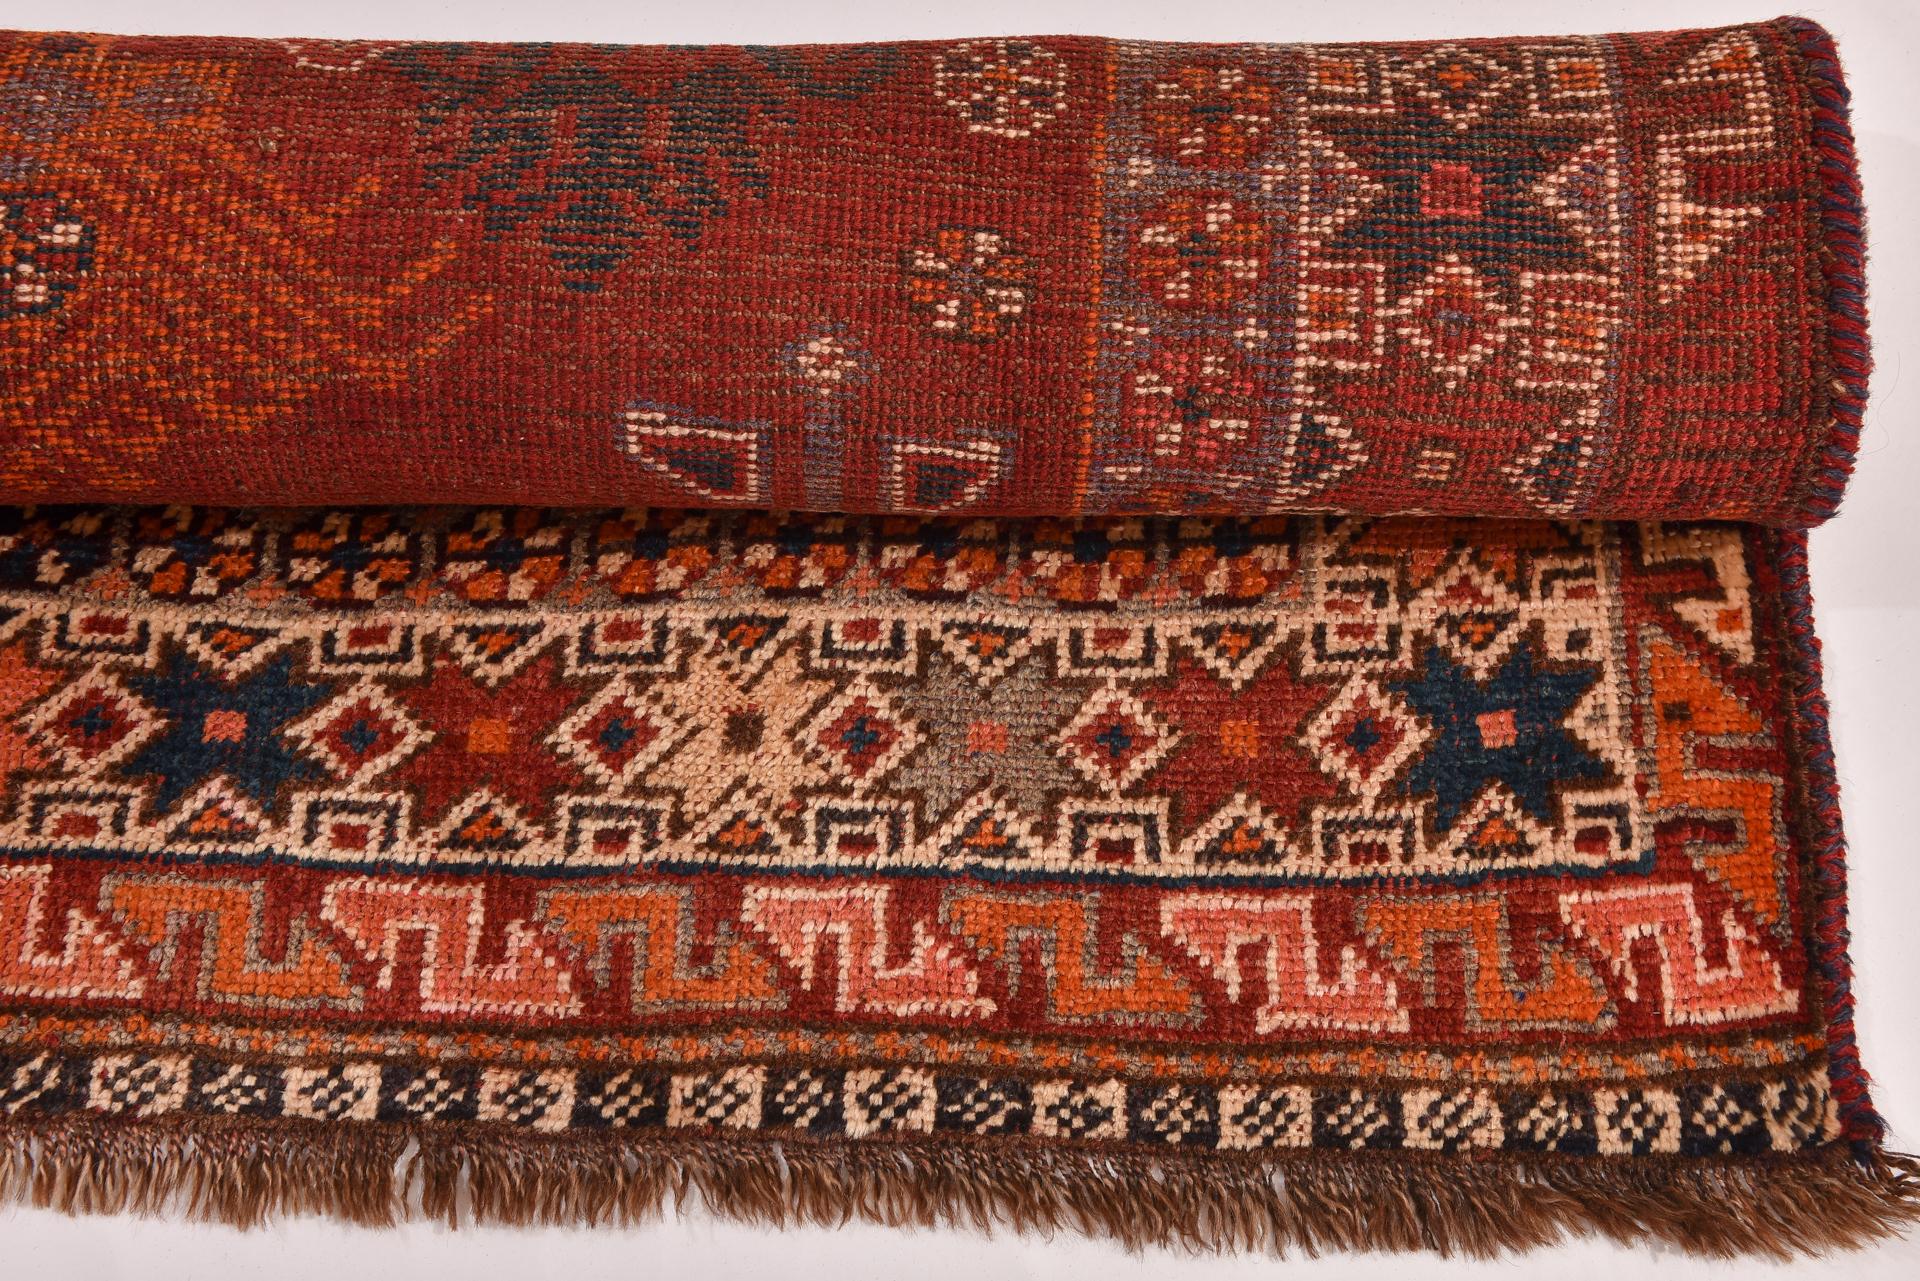 Central Asian Old Nomadic Carpet from My Private Collection For Sale